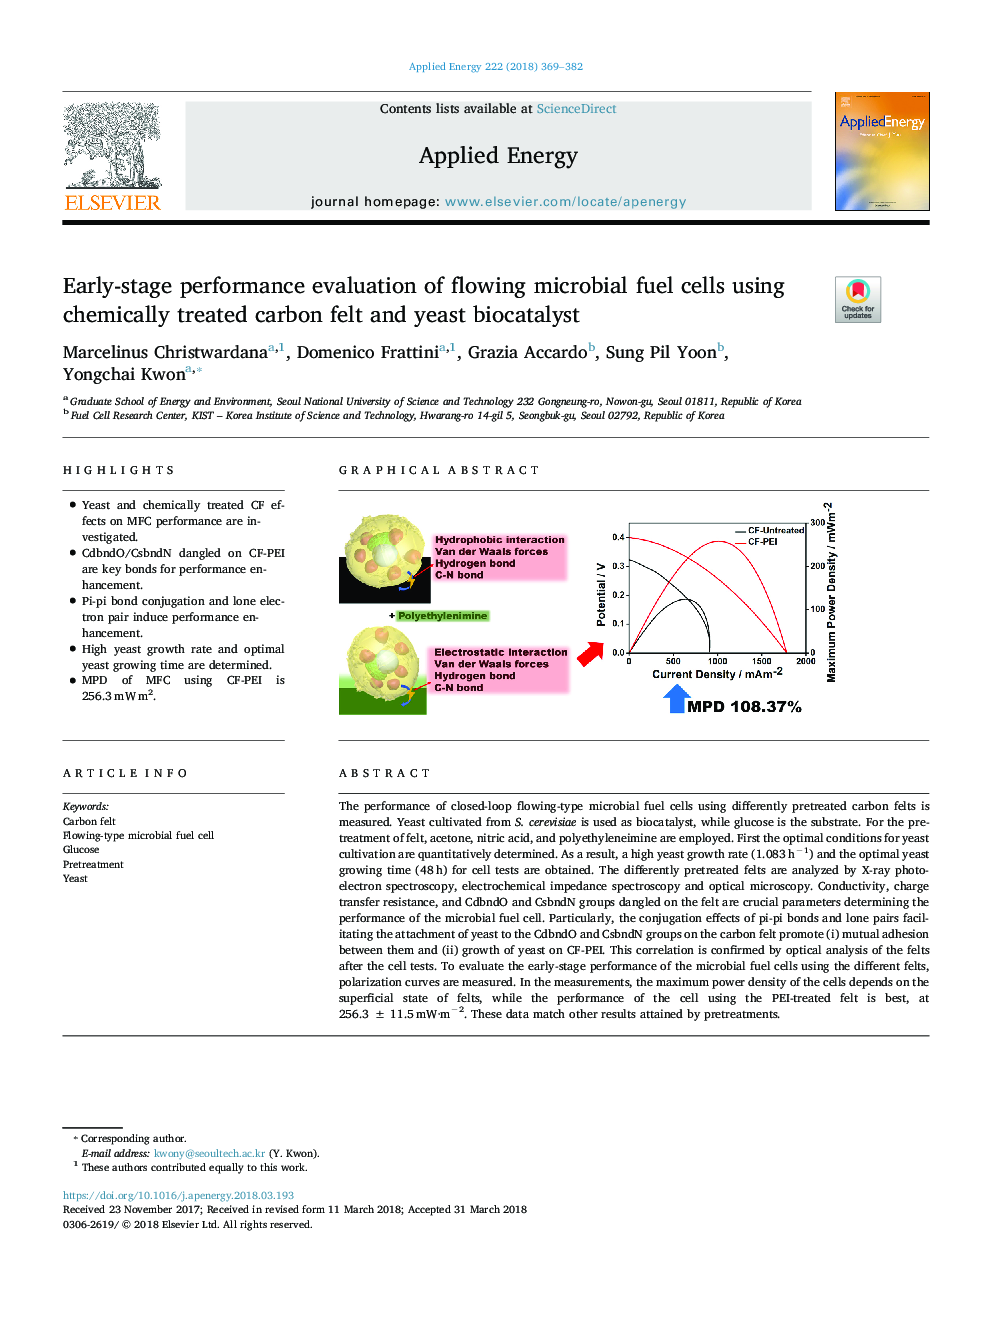 Early-stage performance evaluation of flowing microbial fuel cells using chemically treated carbon felt and yeast biocatalyst